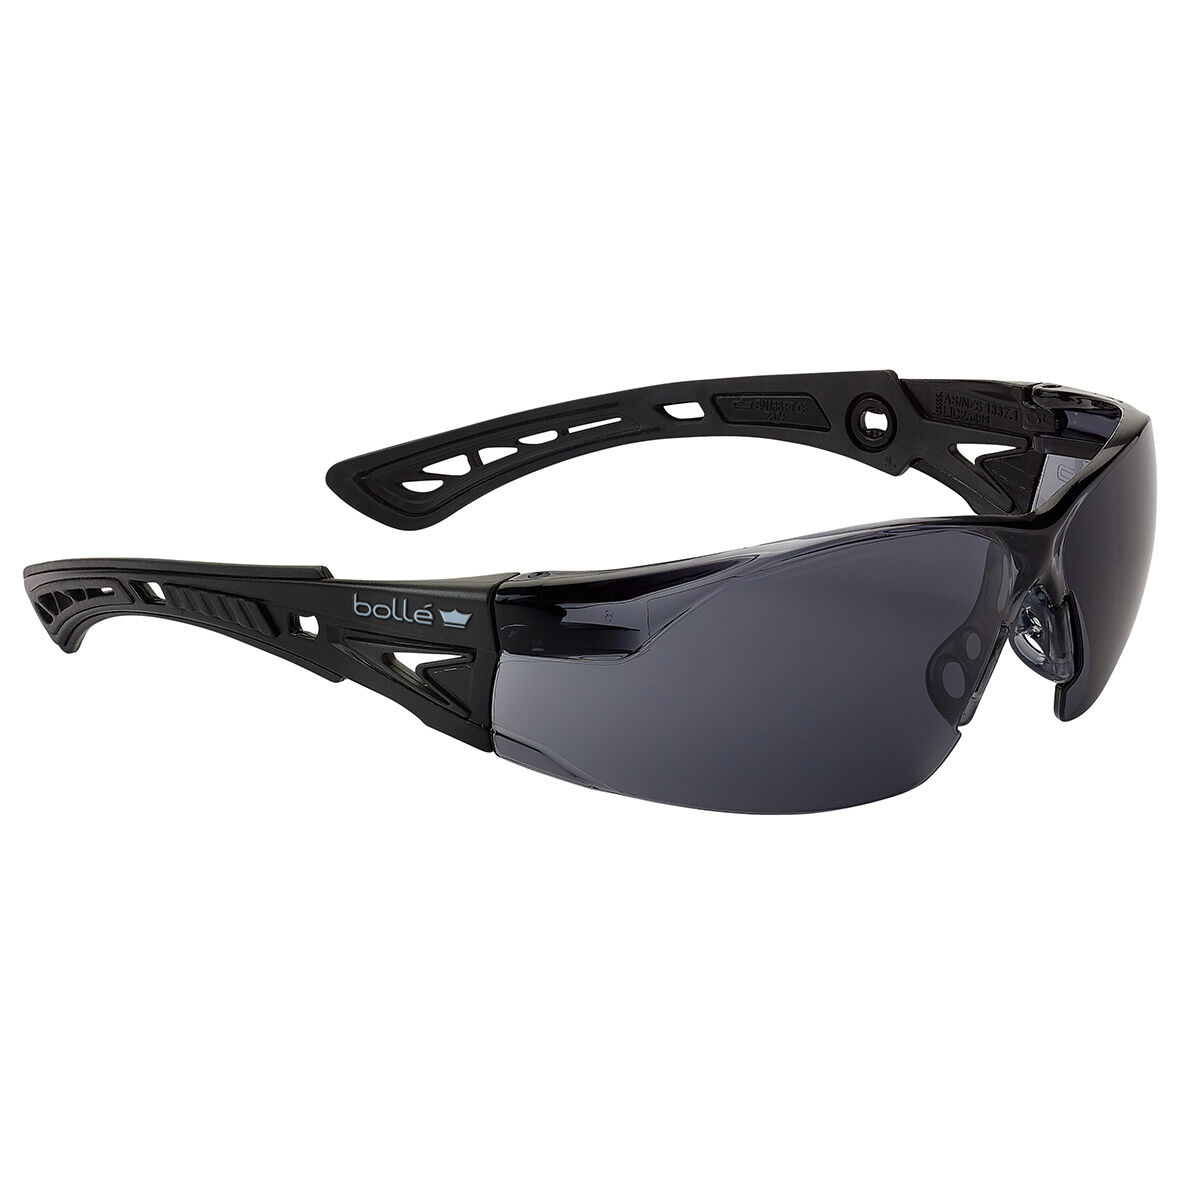 Bolle 40208 Rush Safety Glasses Smoke Lens for sale online 